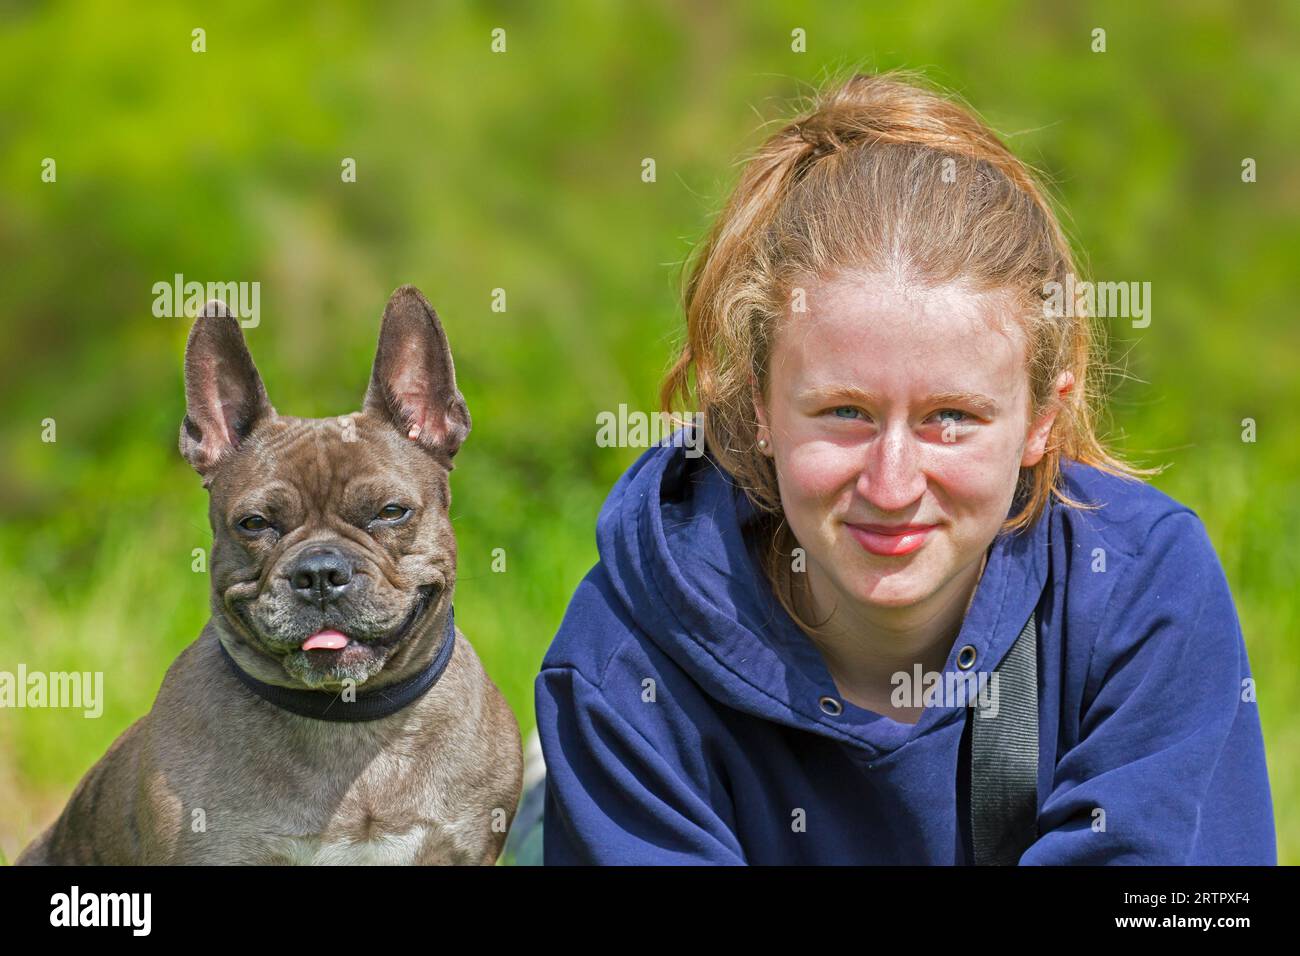 Girl posing with Lilac French bulldog / Isabella frenchie / Bouledogue Français, breed of French companion dog or toy dog in garden Stock Photo